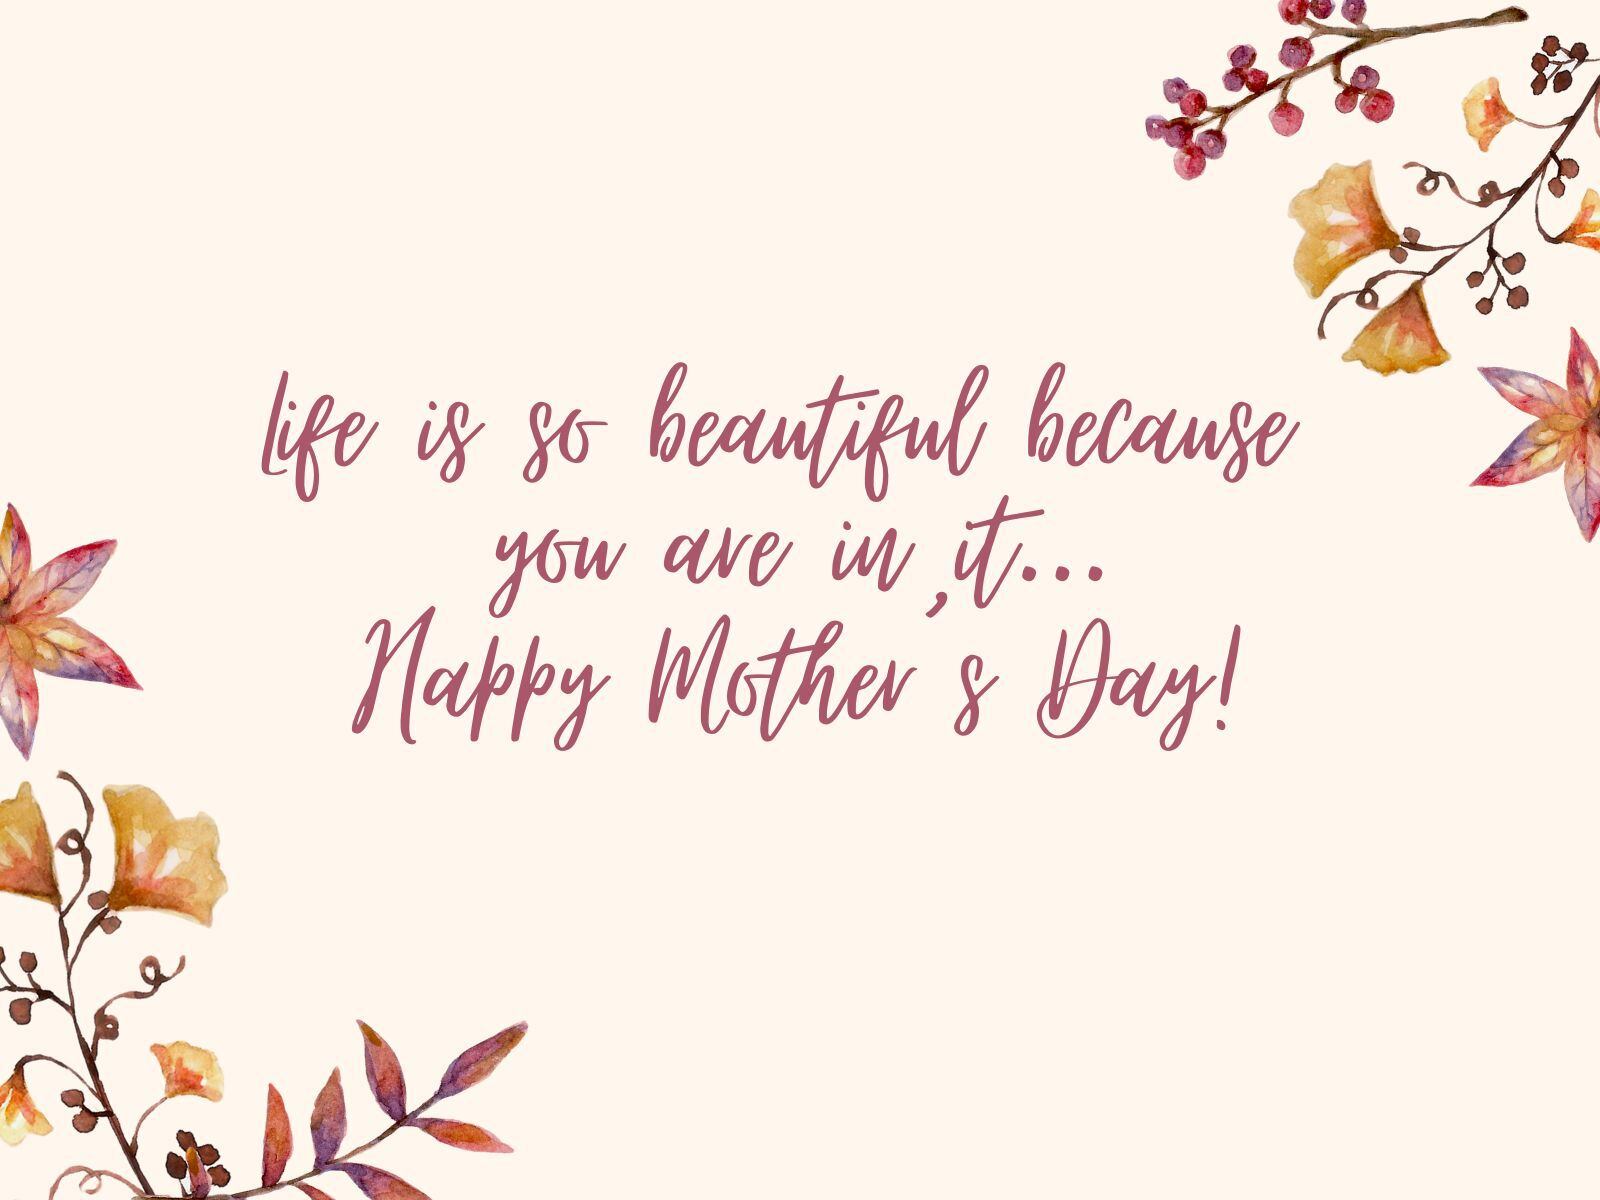 50 Best Mother’s Day Instagram Captions that will make her smile